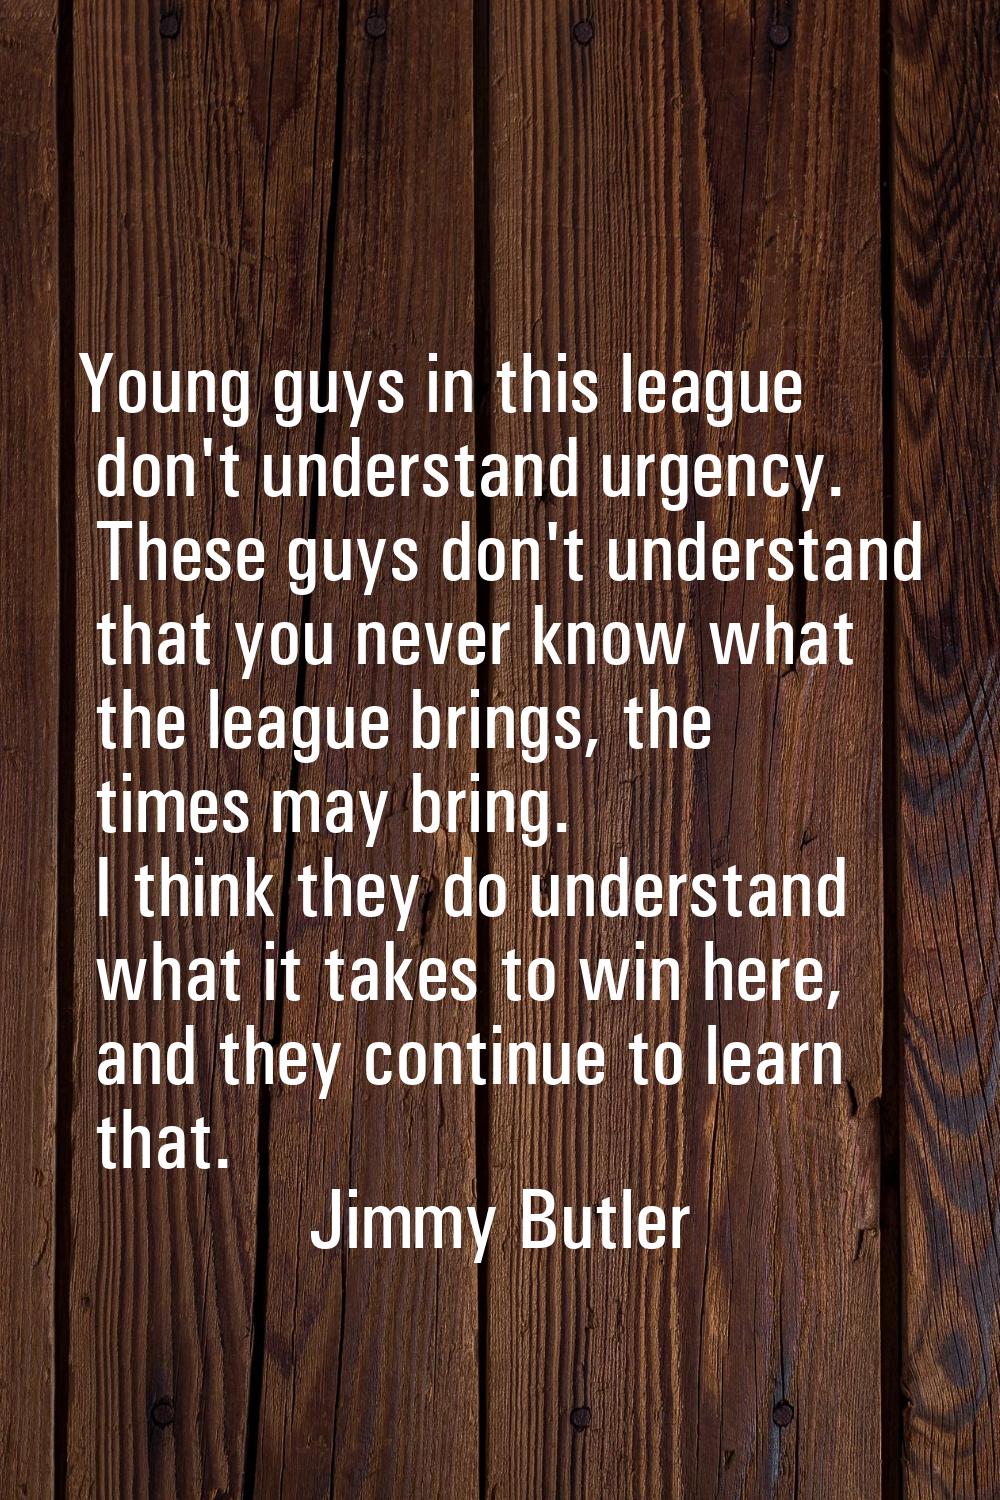 Young guys in this league don't understand urgency. These guys don't understand that you never know